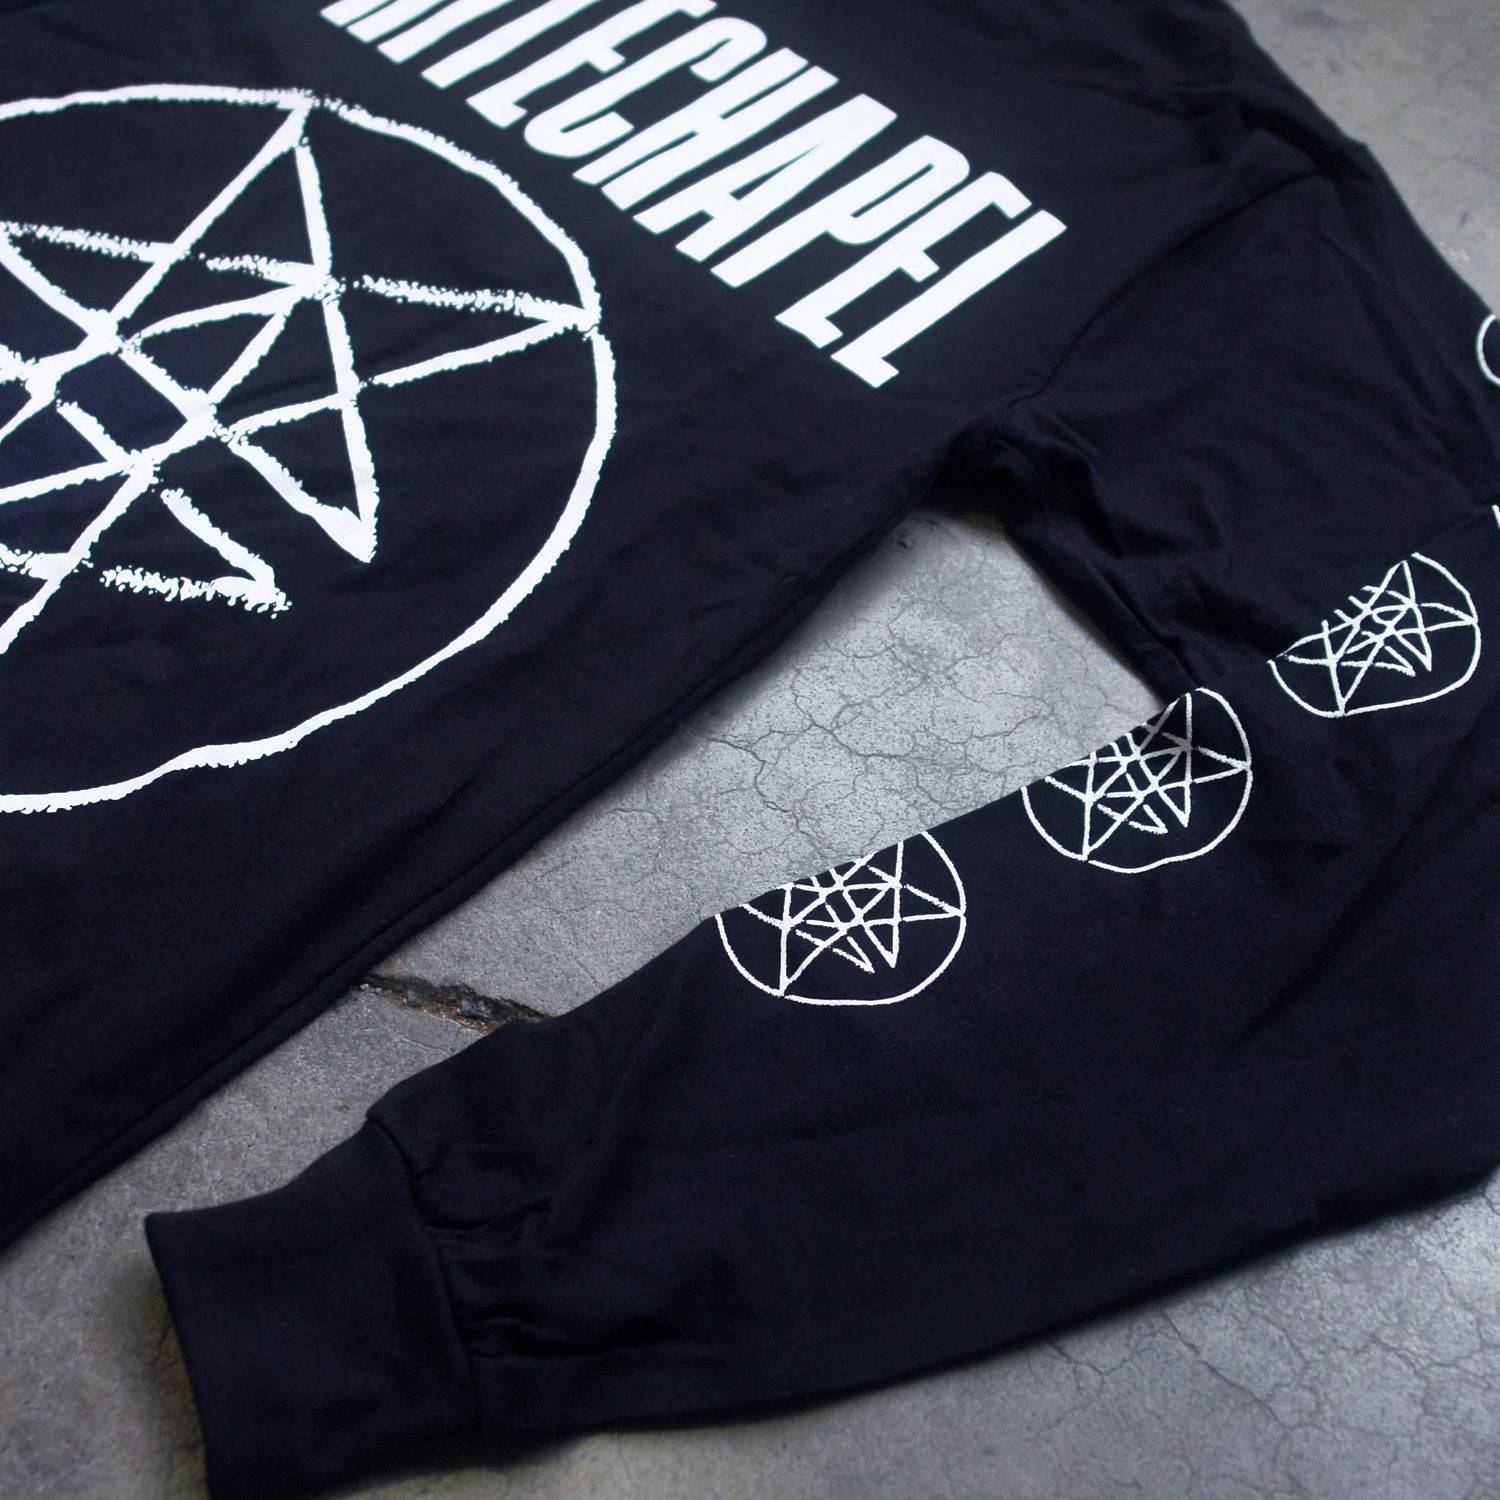 Close up Image of the front of a black longsleeve against a grey background. Across the chest in big white letters says "whitechapel". Below that is what is what is called a large double pentagram-  it is a white circle with two stars mirroring each other on the inside of the circle. Both sleeves also have double pentagrams going down the sleeves from the top to the bottom.